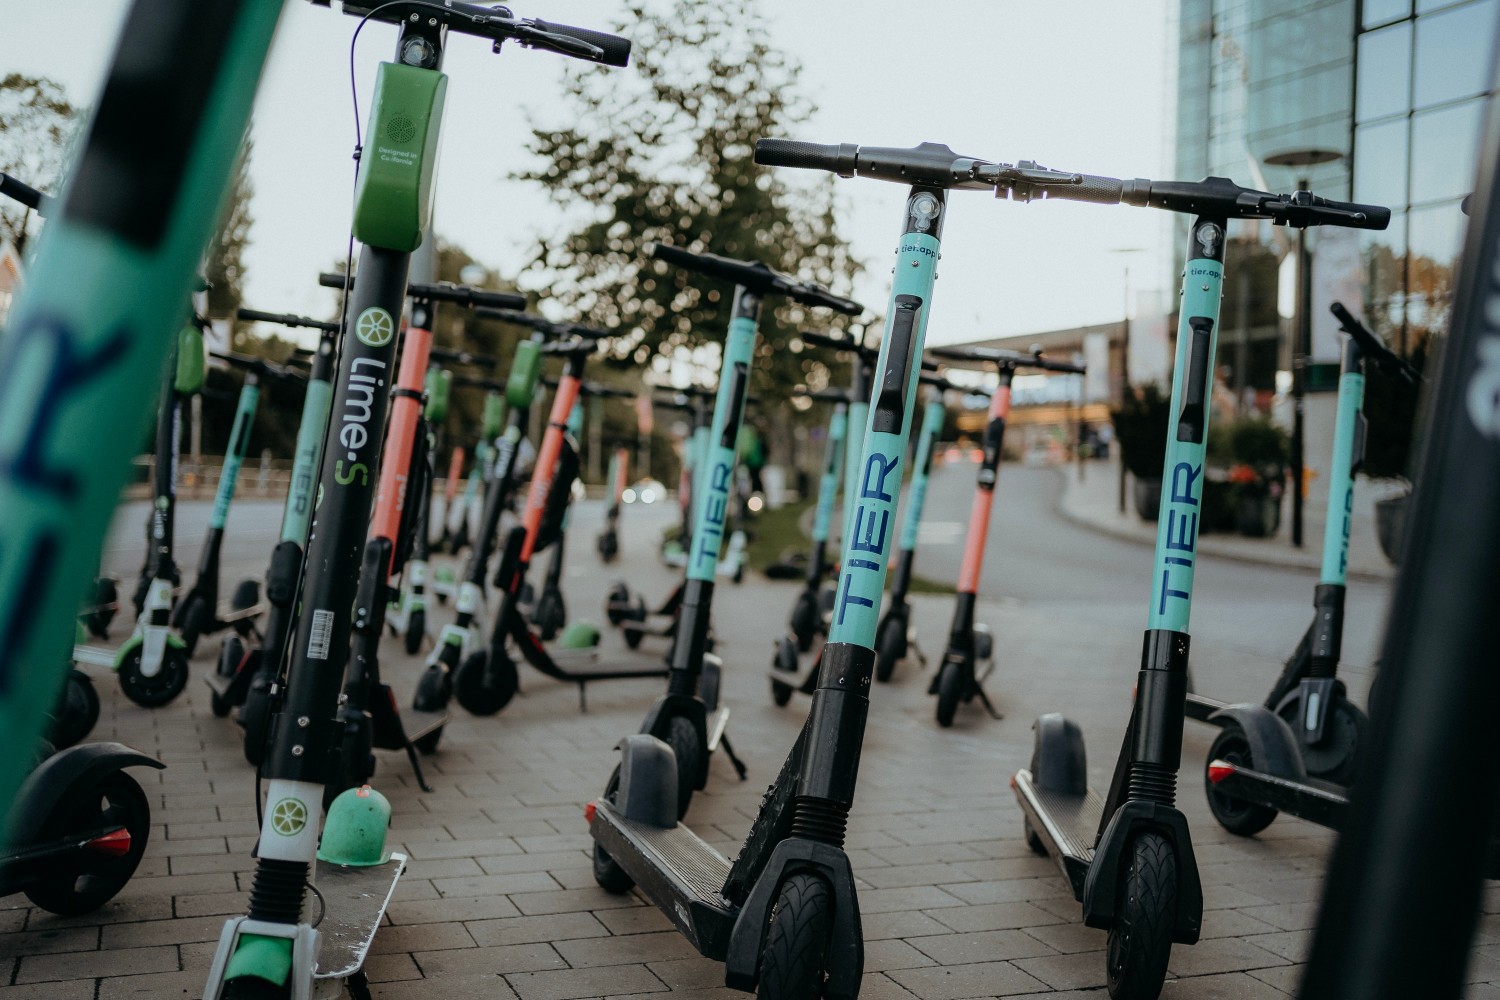 Brampton’s plan to unleash e-scooters prompts accessibility & safety concerns, questions about viability